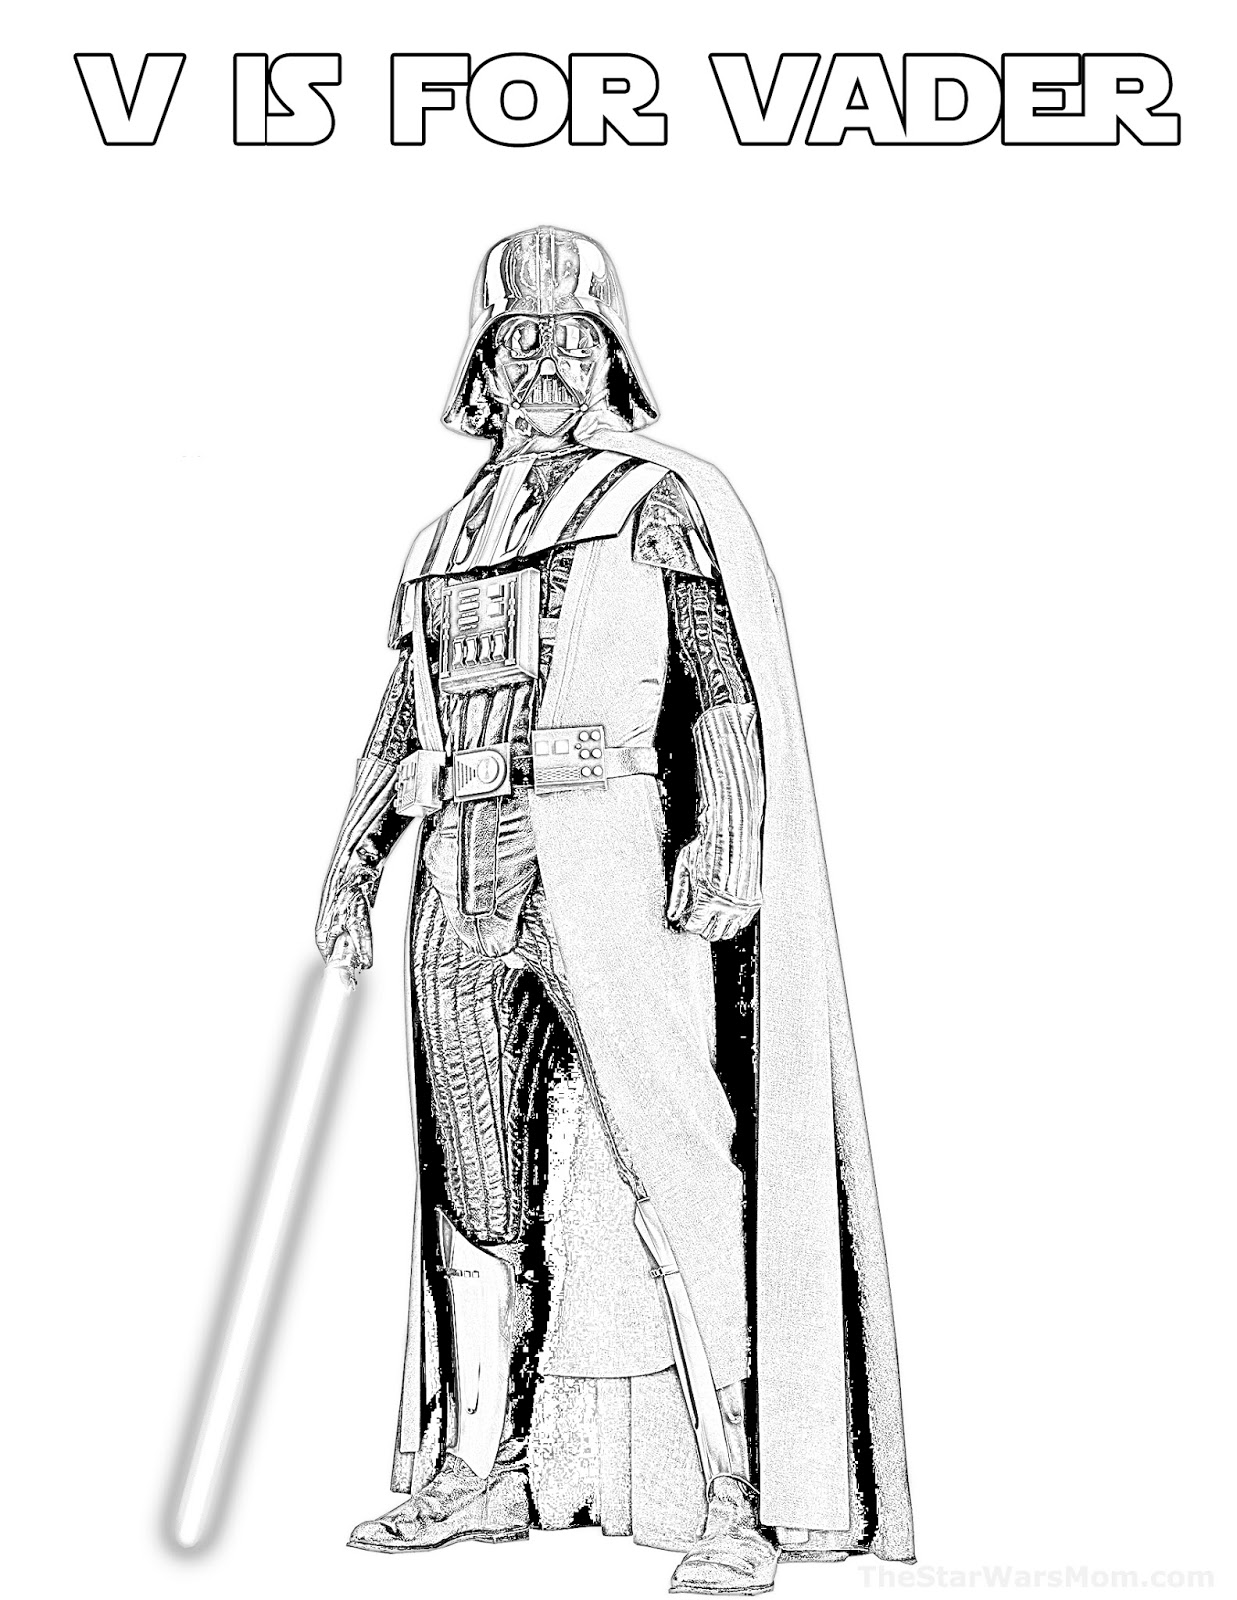 V is for Vader - Star Wars Alphabet Coloring Page - The Star Wars Mom